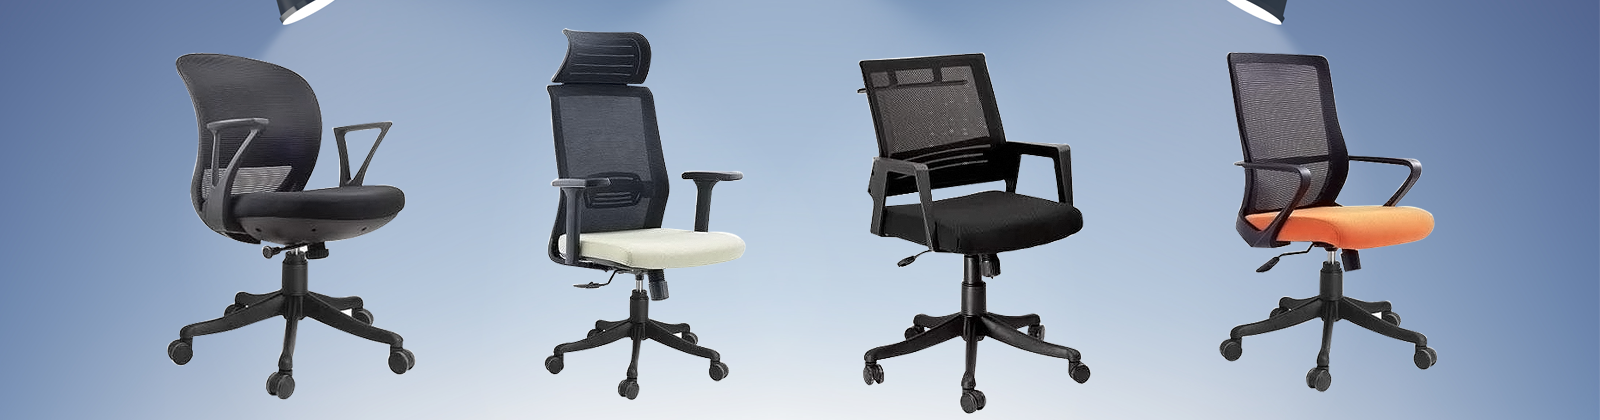 conference chair manufacturer